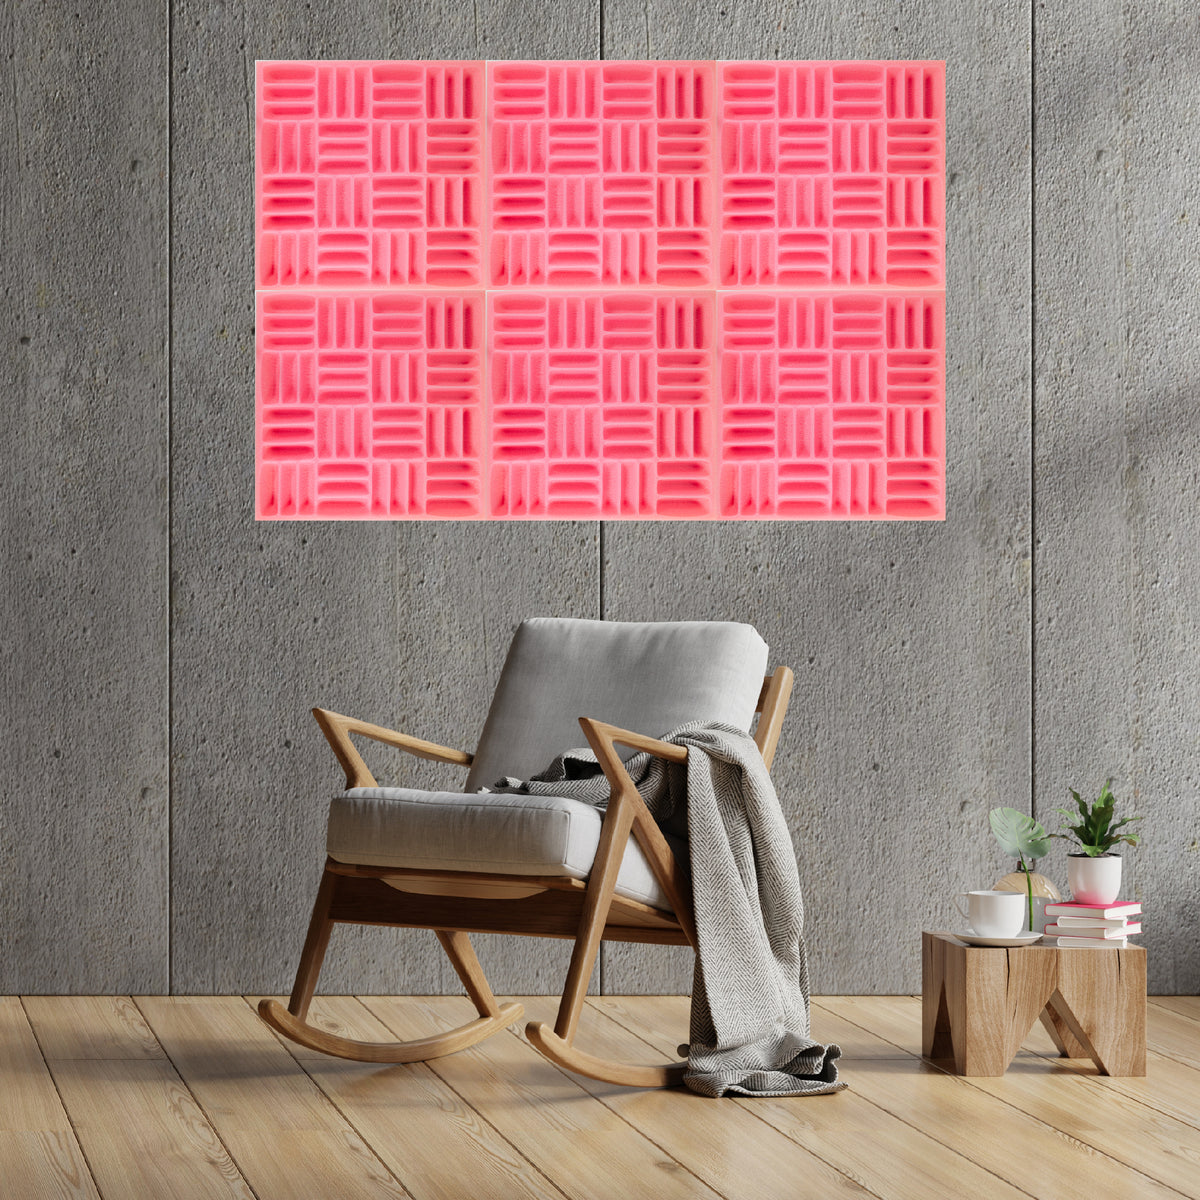 Foroomaco Acoustic foam panels pink main image